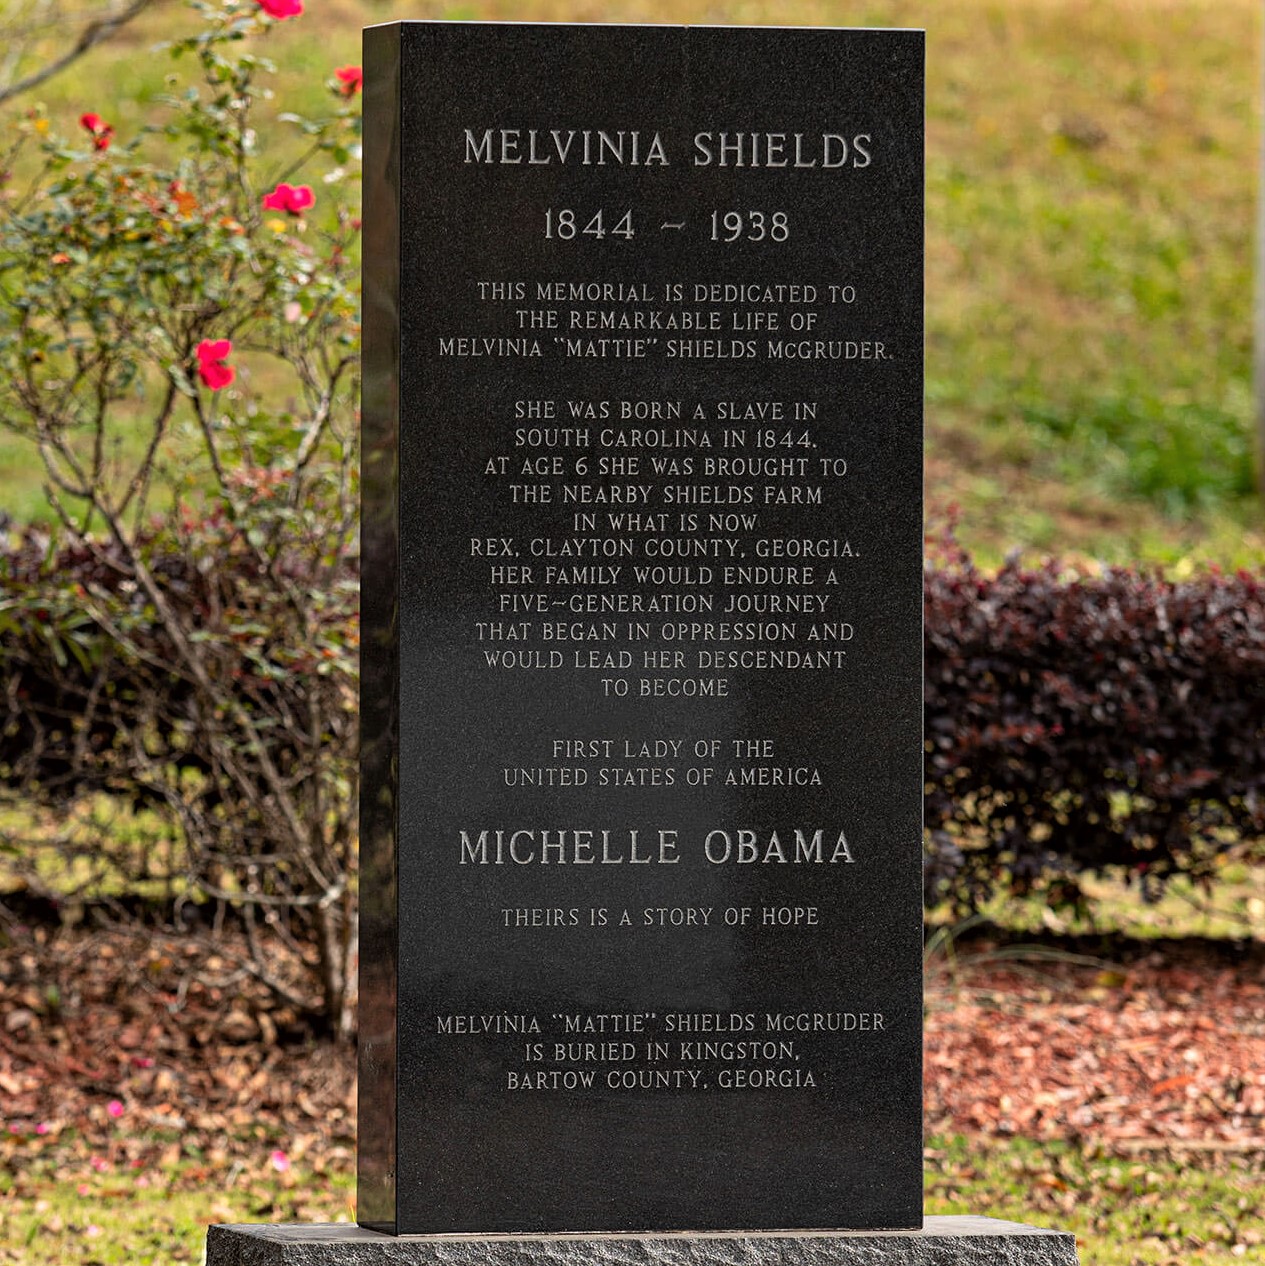 Monument in memory of Michelle Obama's ancestor, Melvinia Shields, who was born a slave five generations ago